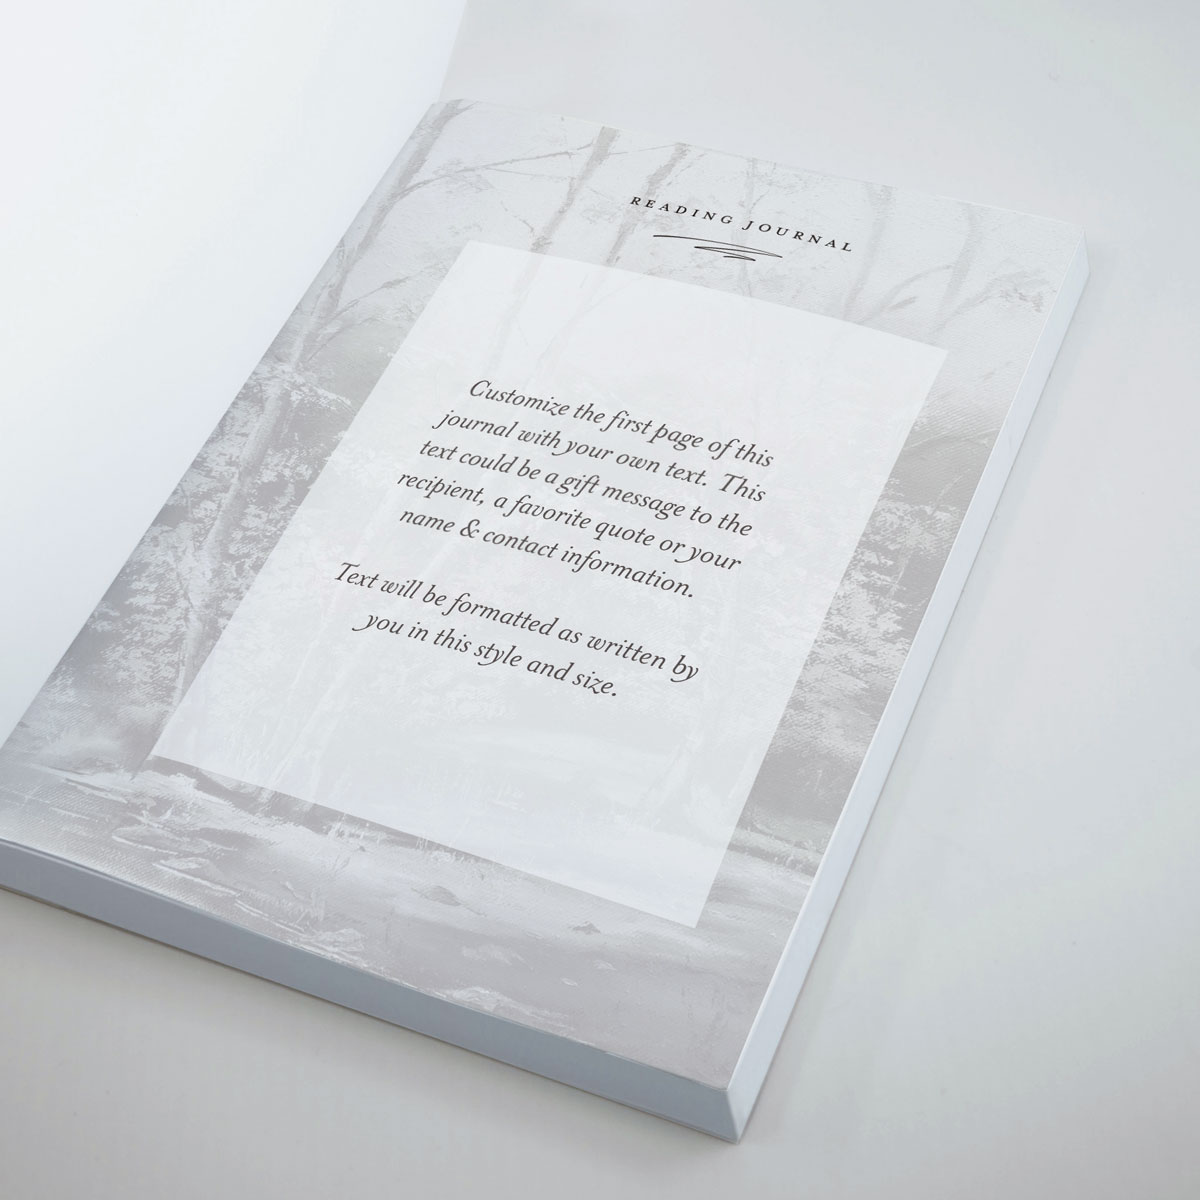 Personalizable Reading Journal – Surreal Forest II